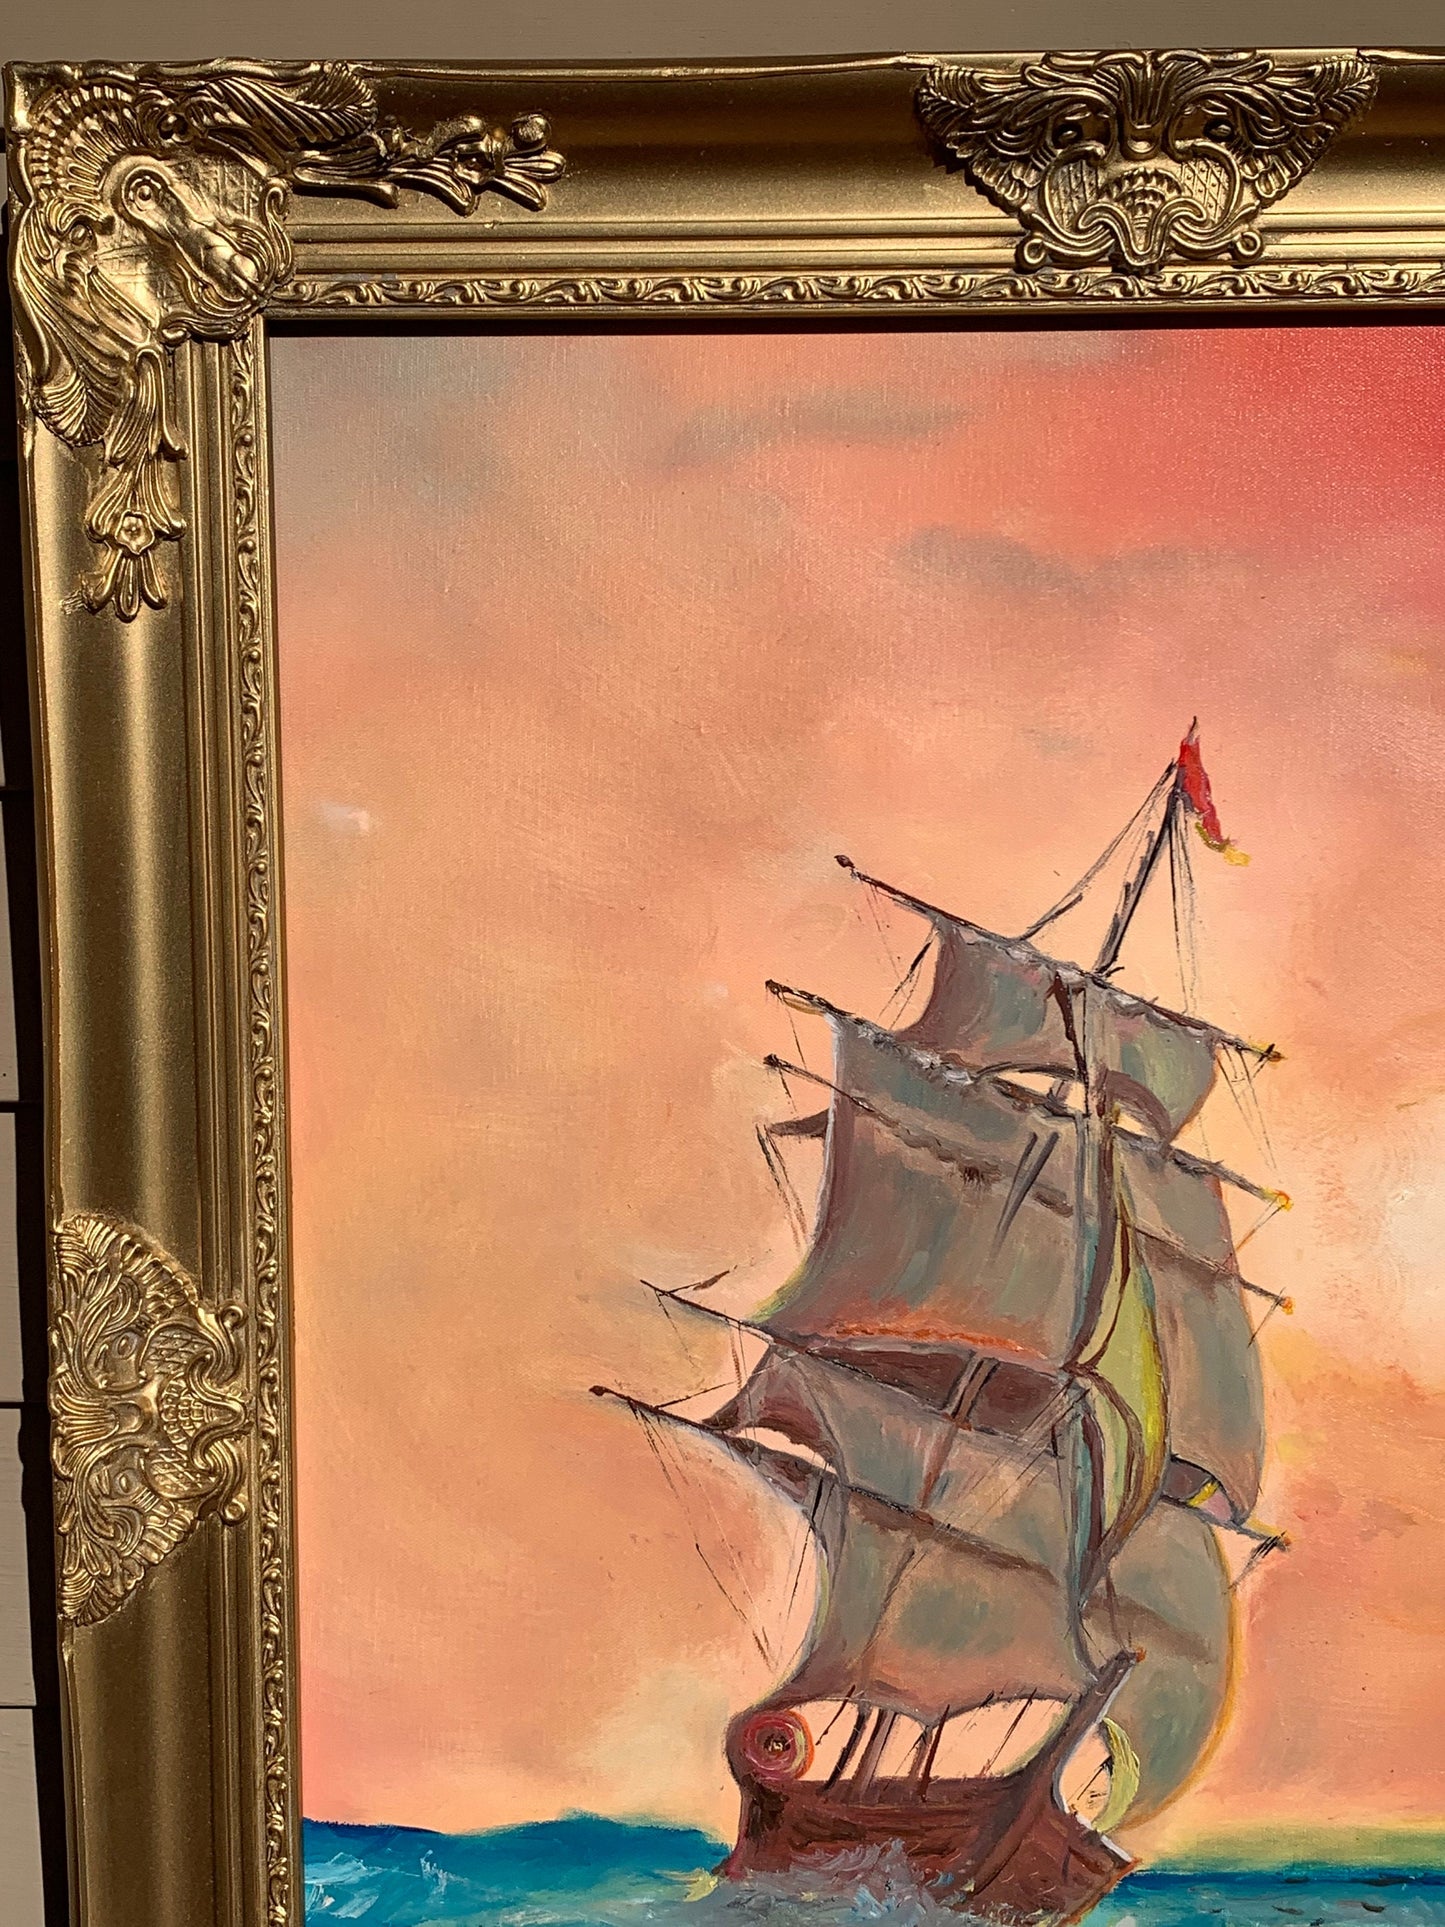 Large Oil Painting on Canvas, Seascape by Serg Graff "Clipper Ship Dream" Framed